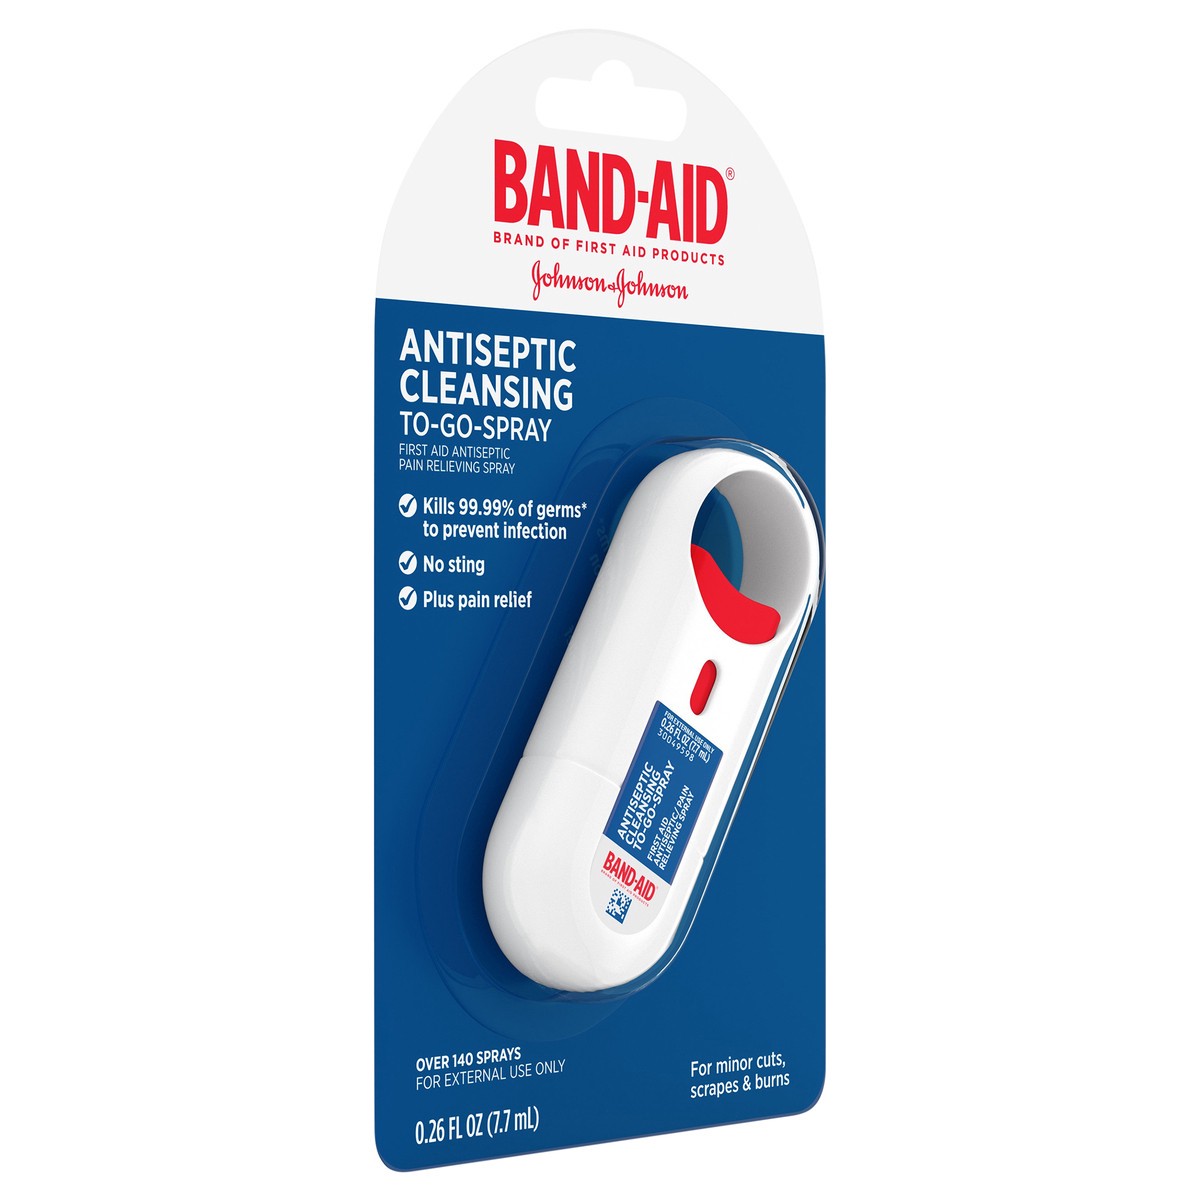 slide 2 of 7, BAND-AID Antiseptic Cleansing To-Go-Spray, First Aid Antiseptic Spray Relieves Pain & Kills Germs Anywhere, Benzalkonium Cl Antiseptic & Pramoxine HCl Topical Analgesic,.26 fl. oz, 0.26 fl oz